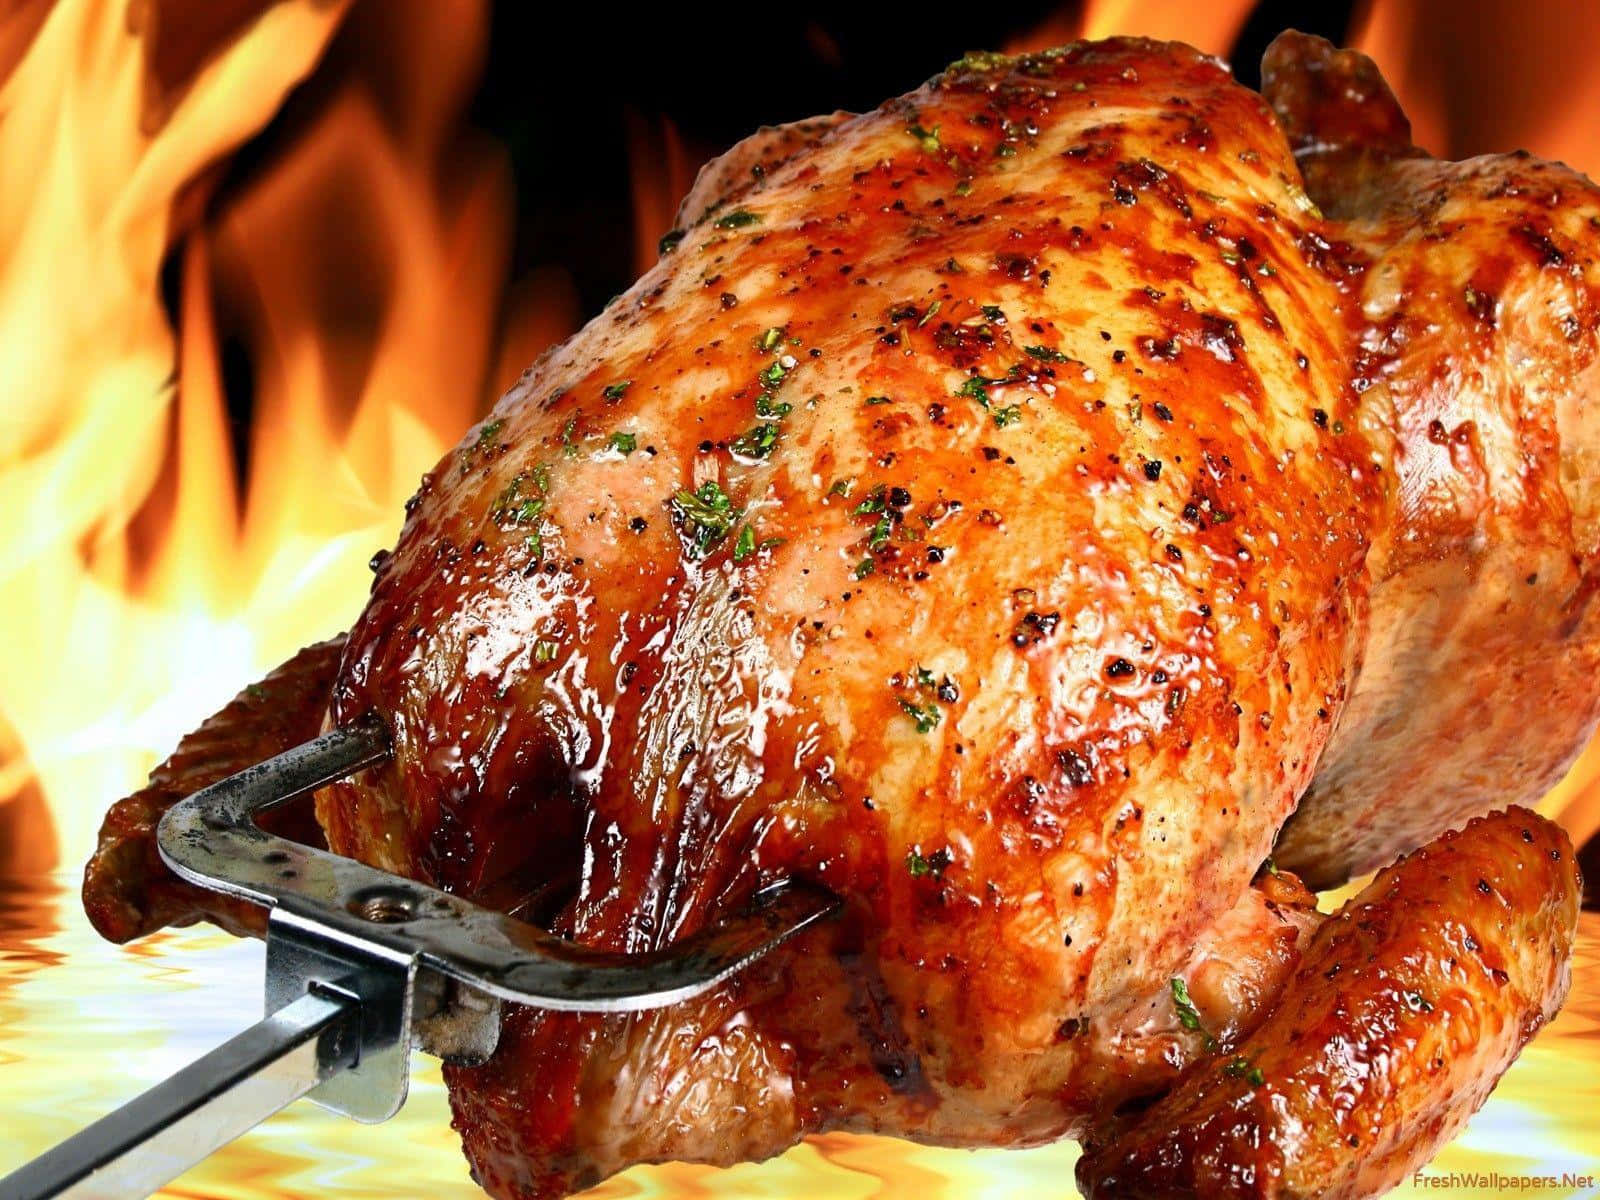 A Chicken Is Being Cooked On A Grill